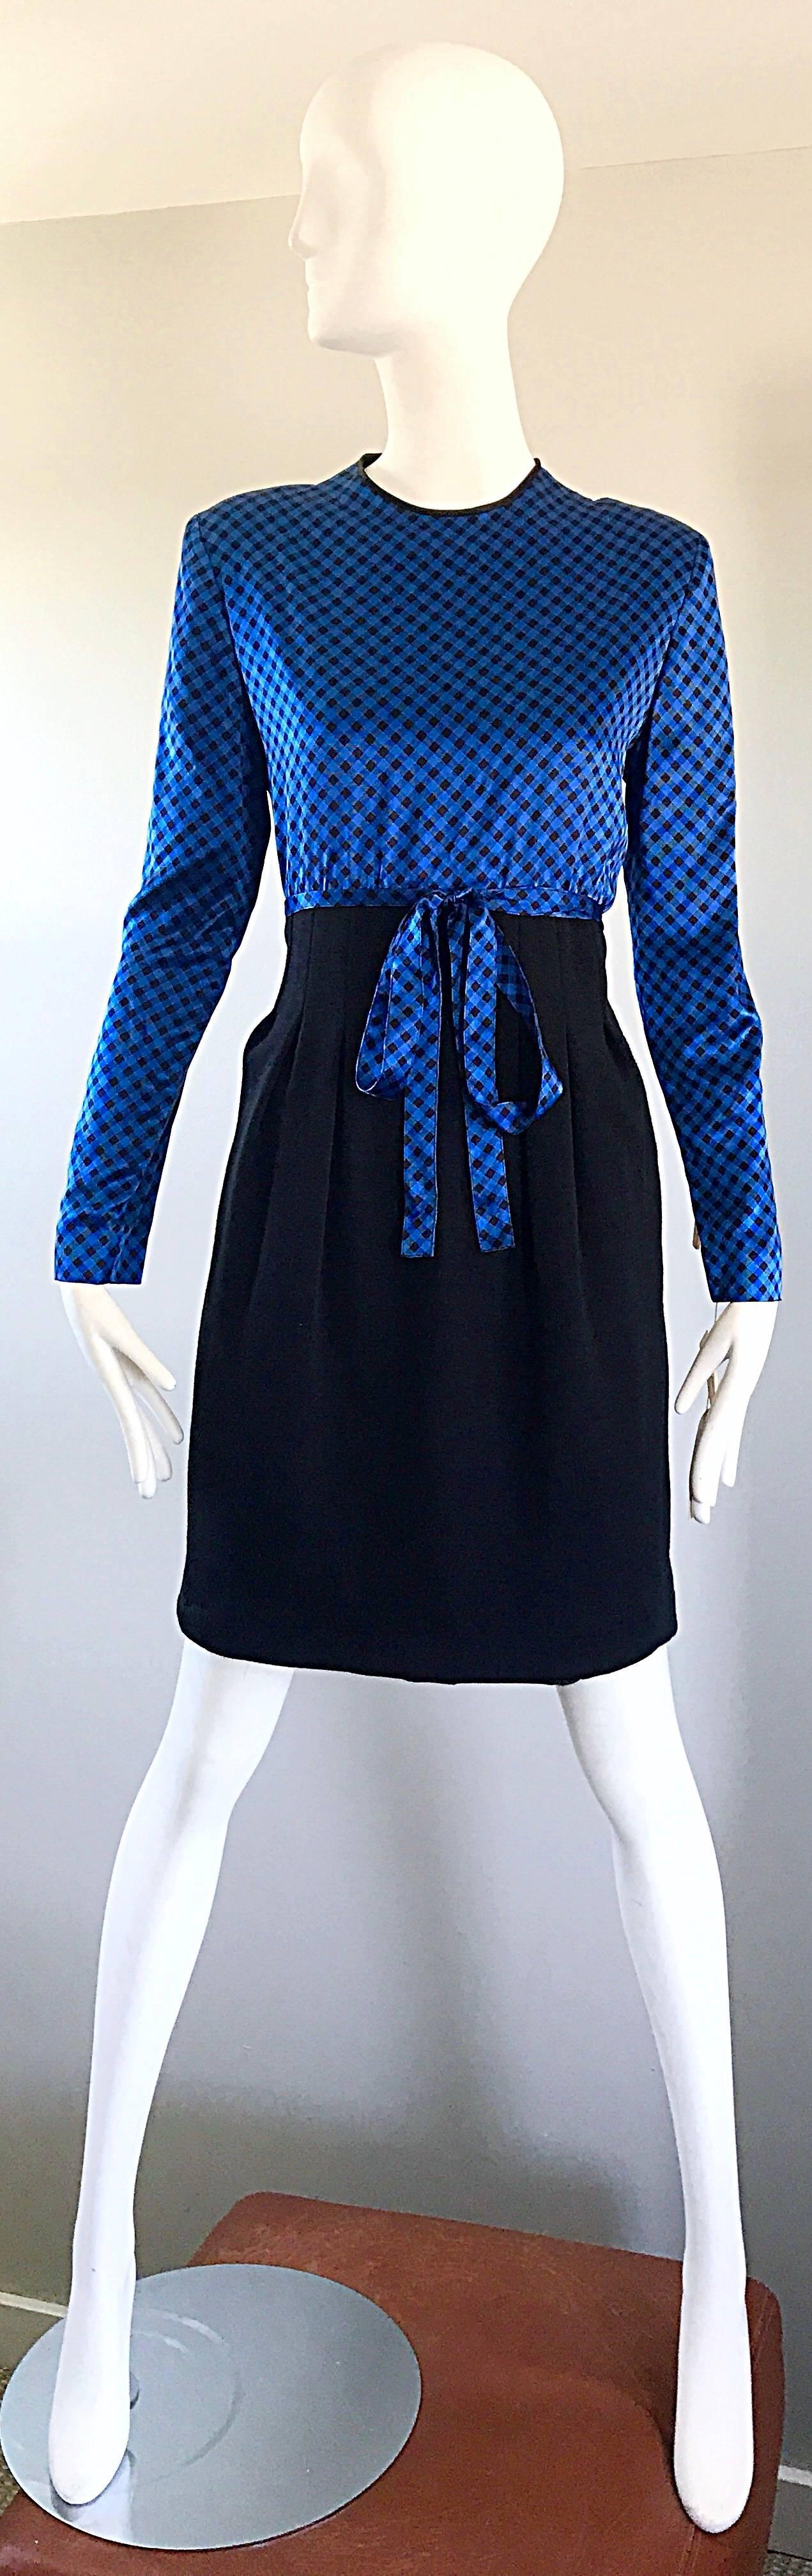 New with tags chic vintage 90s GEOFFREY BEENE (Mr Beene) dress! Features a royal blue and black gingham fitted silk bodice and a black virgin wool pencil skirt. Pockets at each hip. Attached tie belt can be tied in the front or back (as shown in